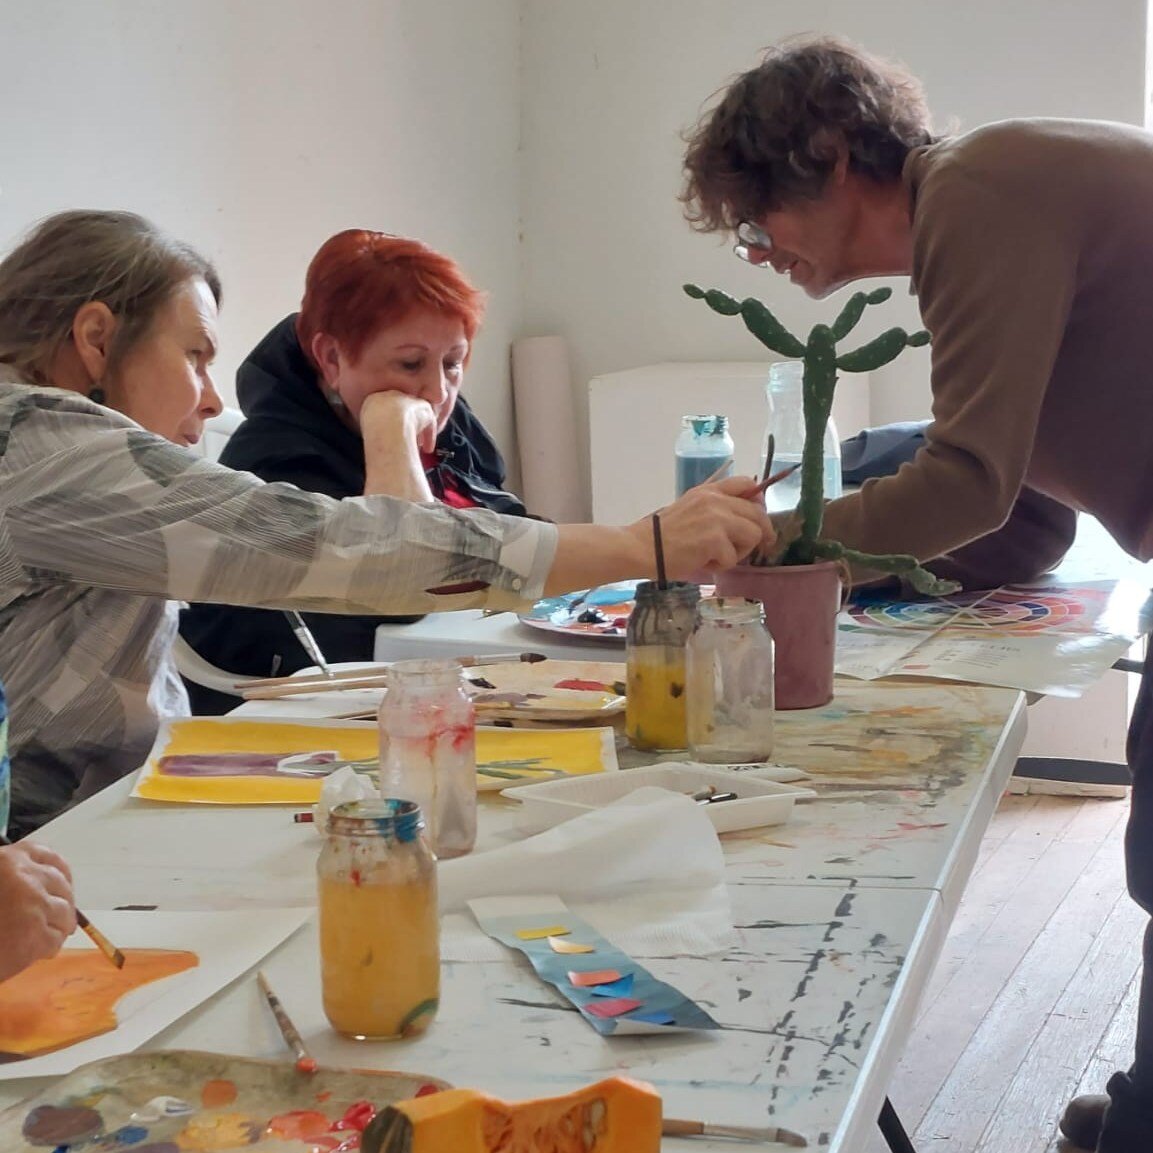 Last week the Saddlery was awash with colour when BHAE Artist in Residence David Collins hosted a workshop; exploring how to mix paints and combine colours for creative effect. 

#artistinresidence #artworkshop #brokenhill